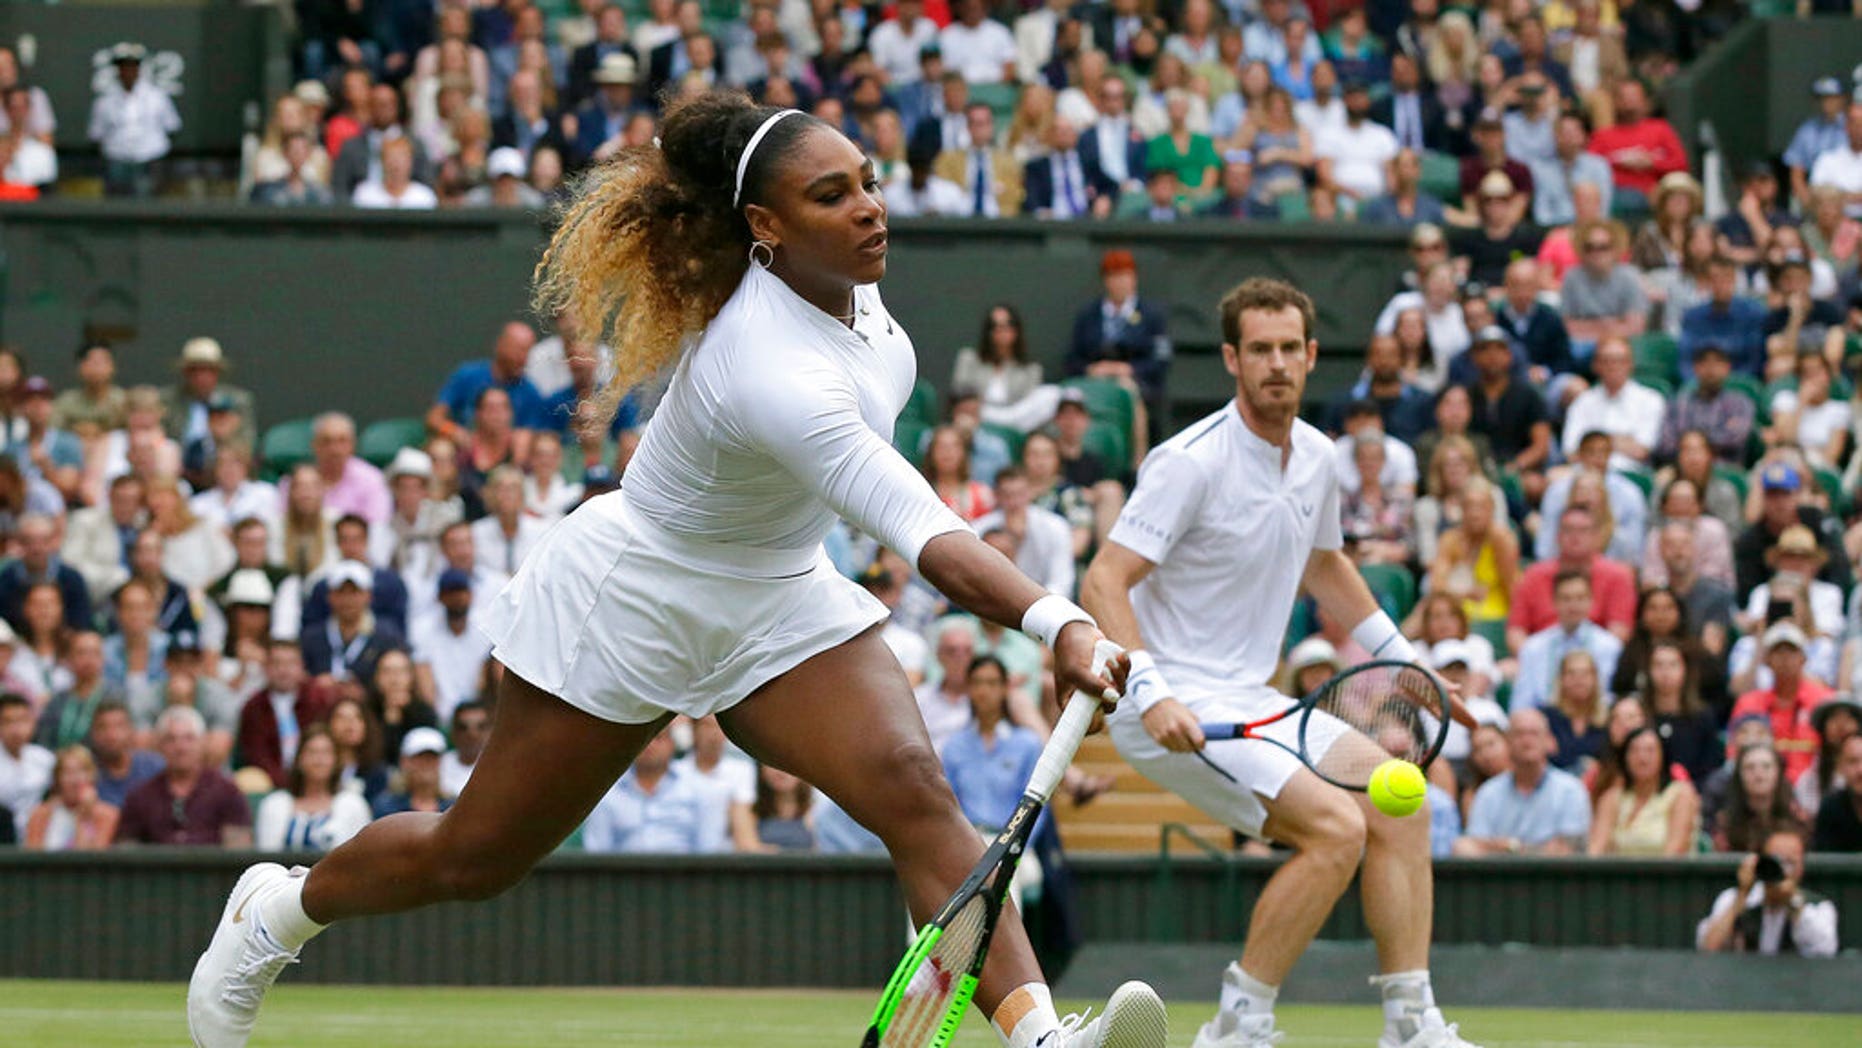 Strong Wimbledon showing for Serena Williams: wins in singles, mixed-doubles play ...